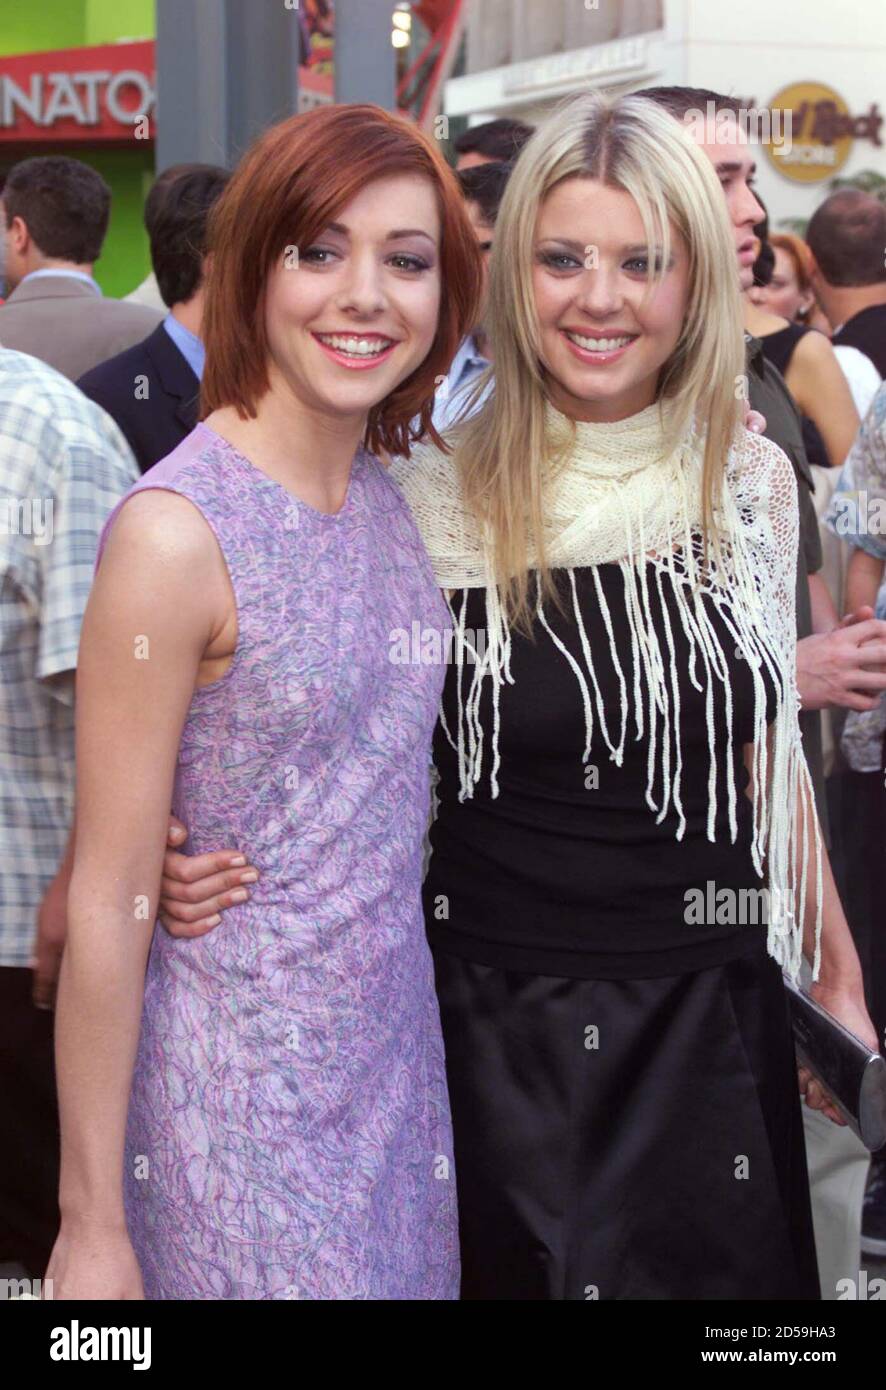 Actresses Alyson Hannigan (L) and Tara Reid, two of the ensemble cast members of the comedy film ' American Pie' arrive for the film's premiere July 7 in Los Angeles. [ The film opens July 9 in the United States explores a group of teenagers and their quest to lose their virginity. ] ??» Stock Photo